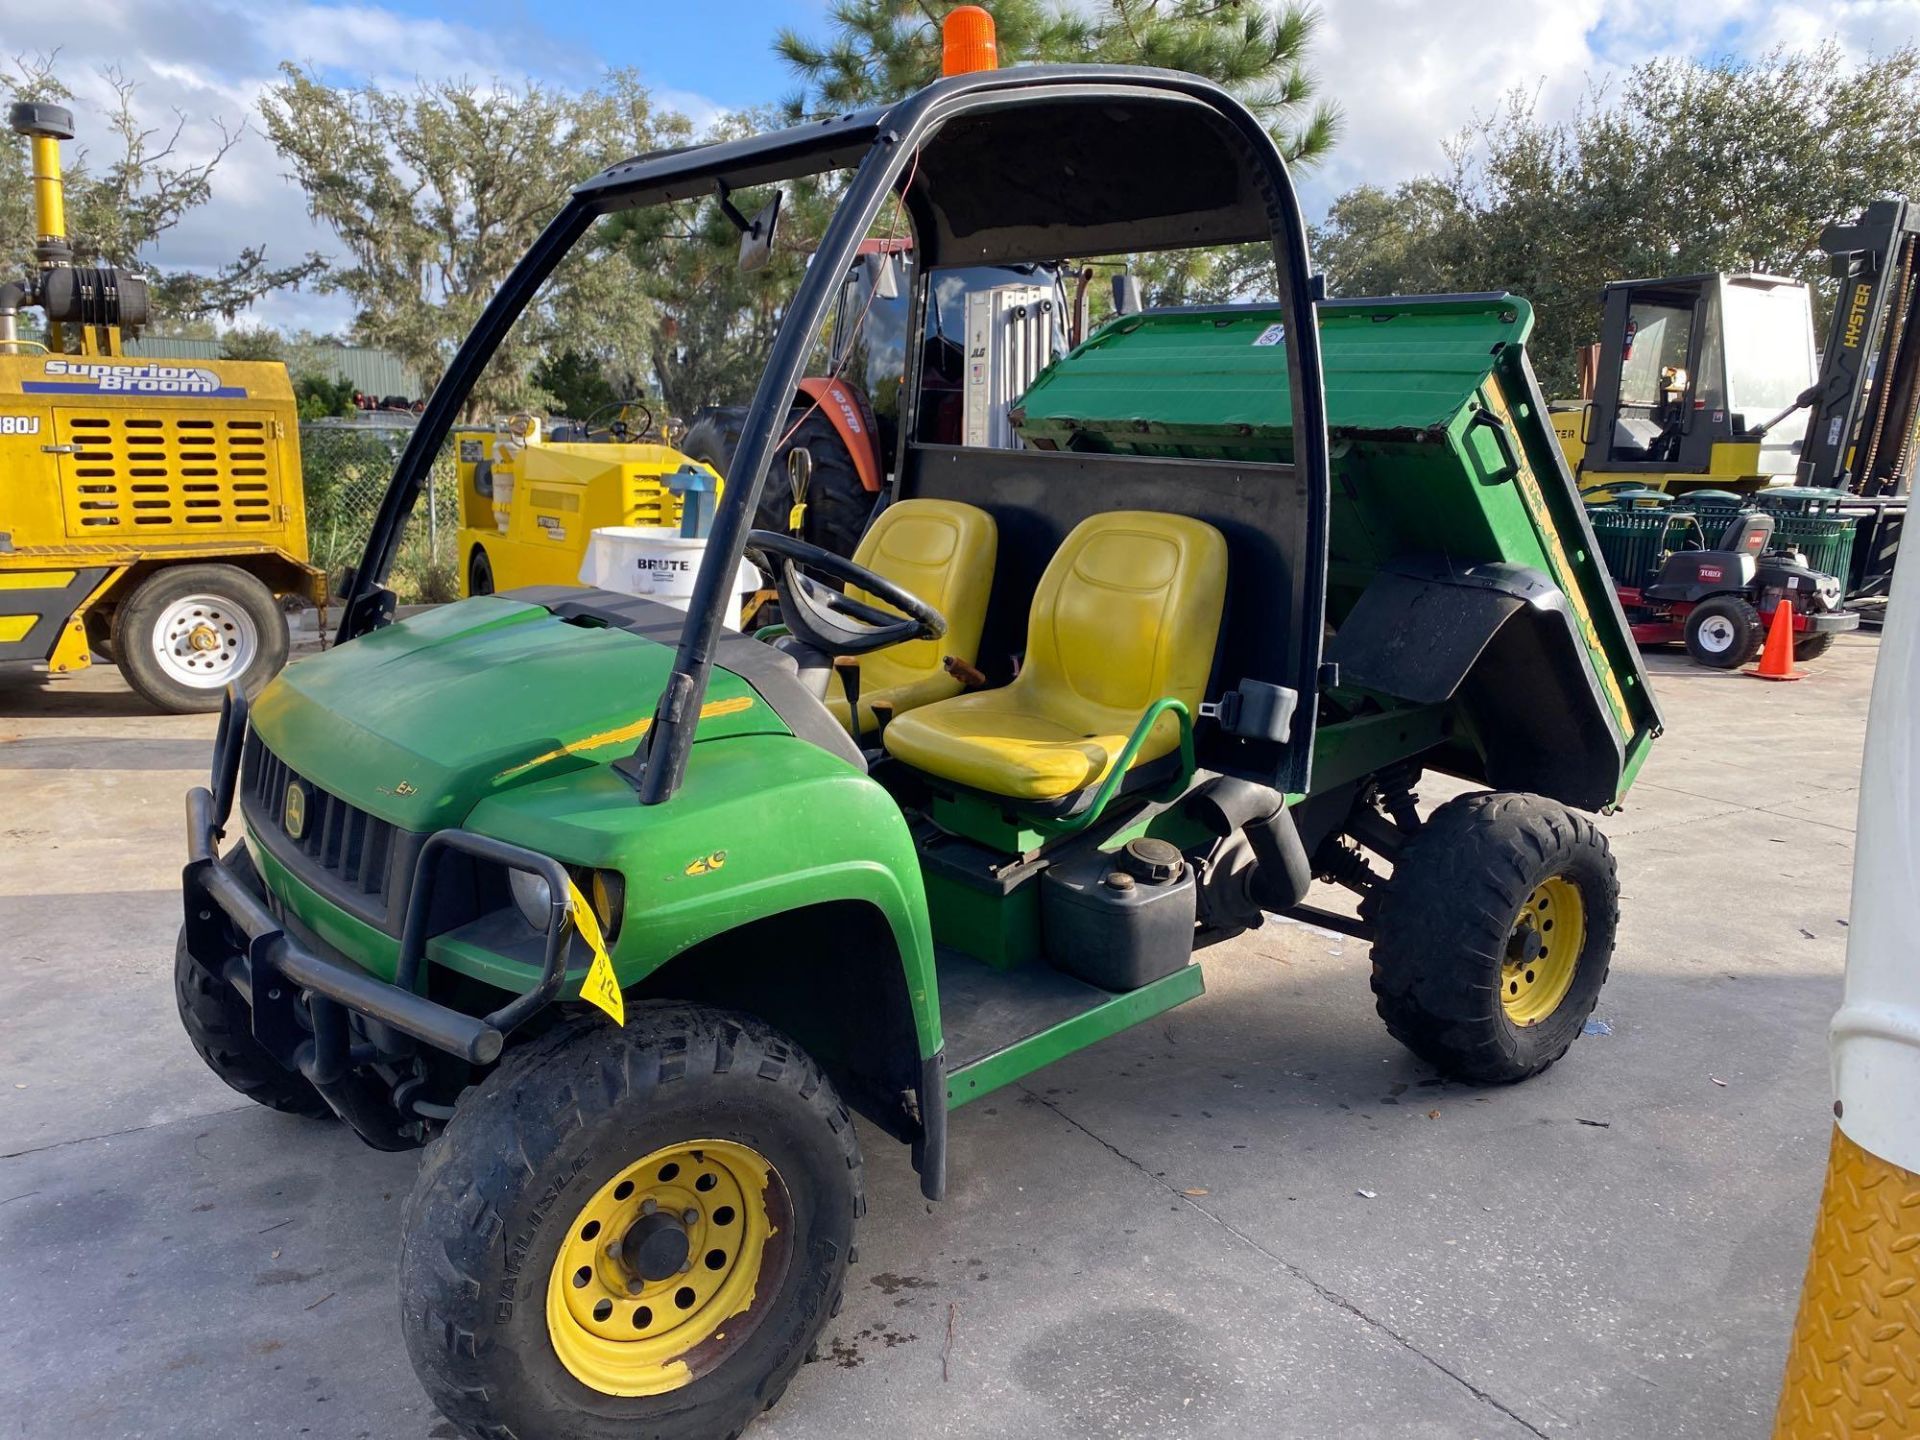 JOHN DEERE GATOR XUV UTILITY CART WITH HYDRAULIC DUMP BED, GAS POWERED, 1,713 HOURS SHOWING 4x4